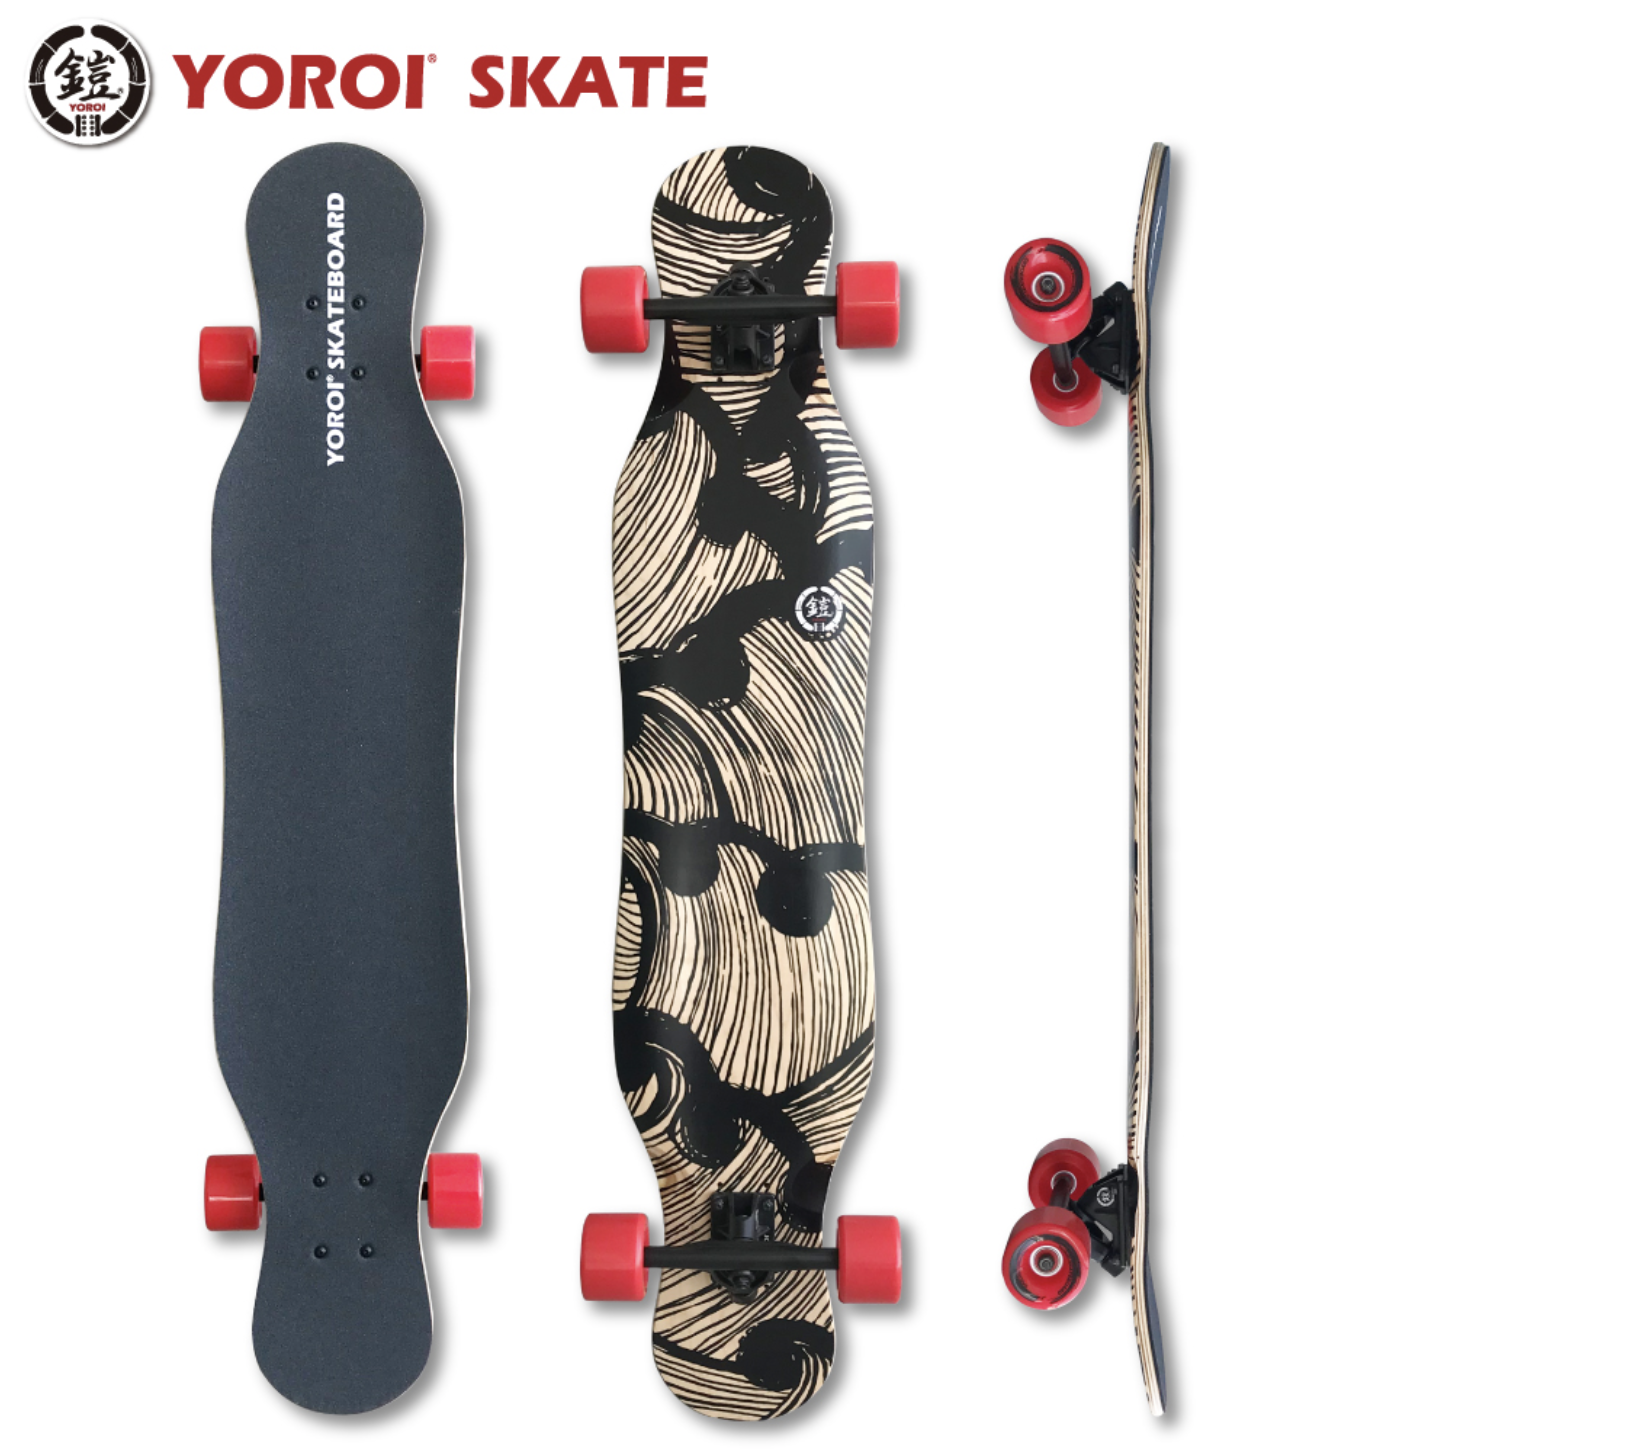 【YOROI SKATE BOARD】 JUJU 45 ロングスケートボード - JOINT HOUSE